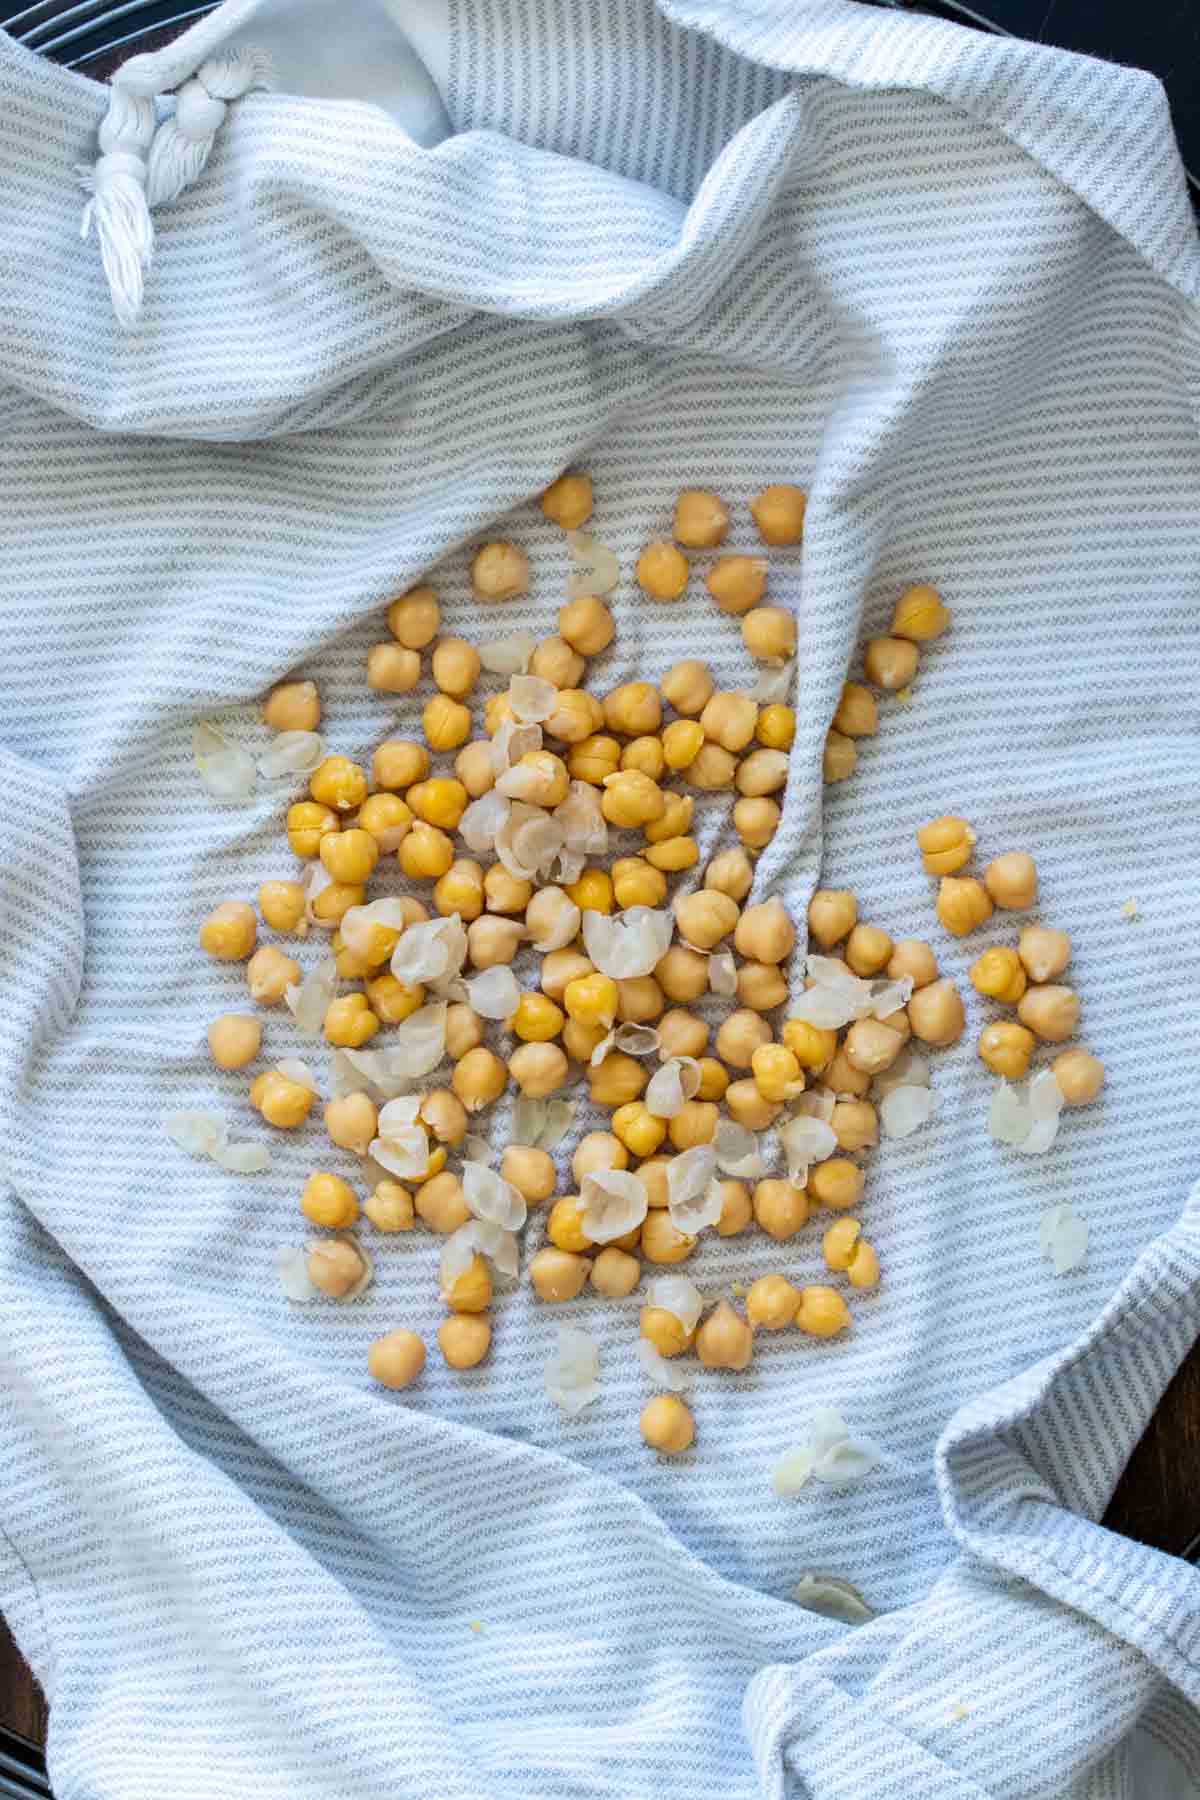 Cooked chickpeas with skins half off on a white kitchen towel